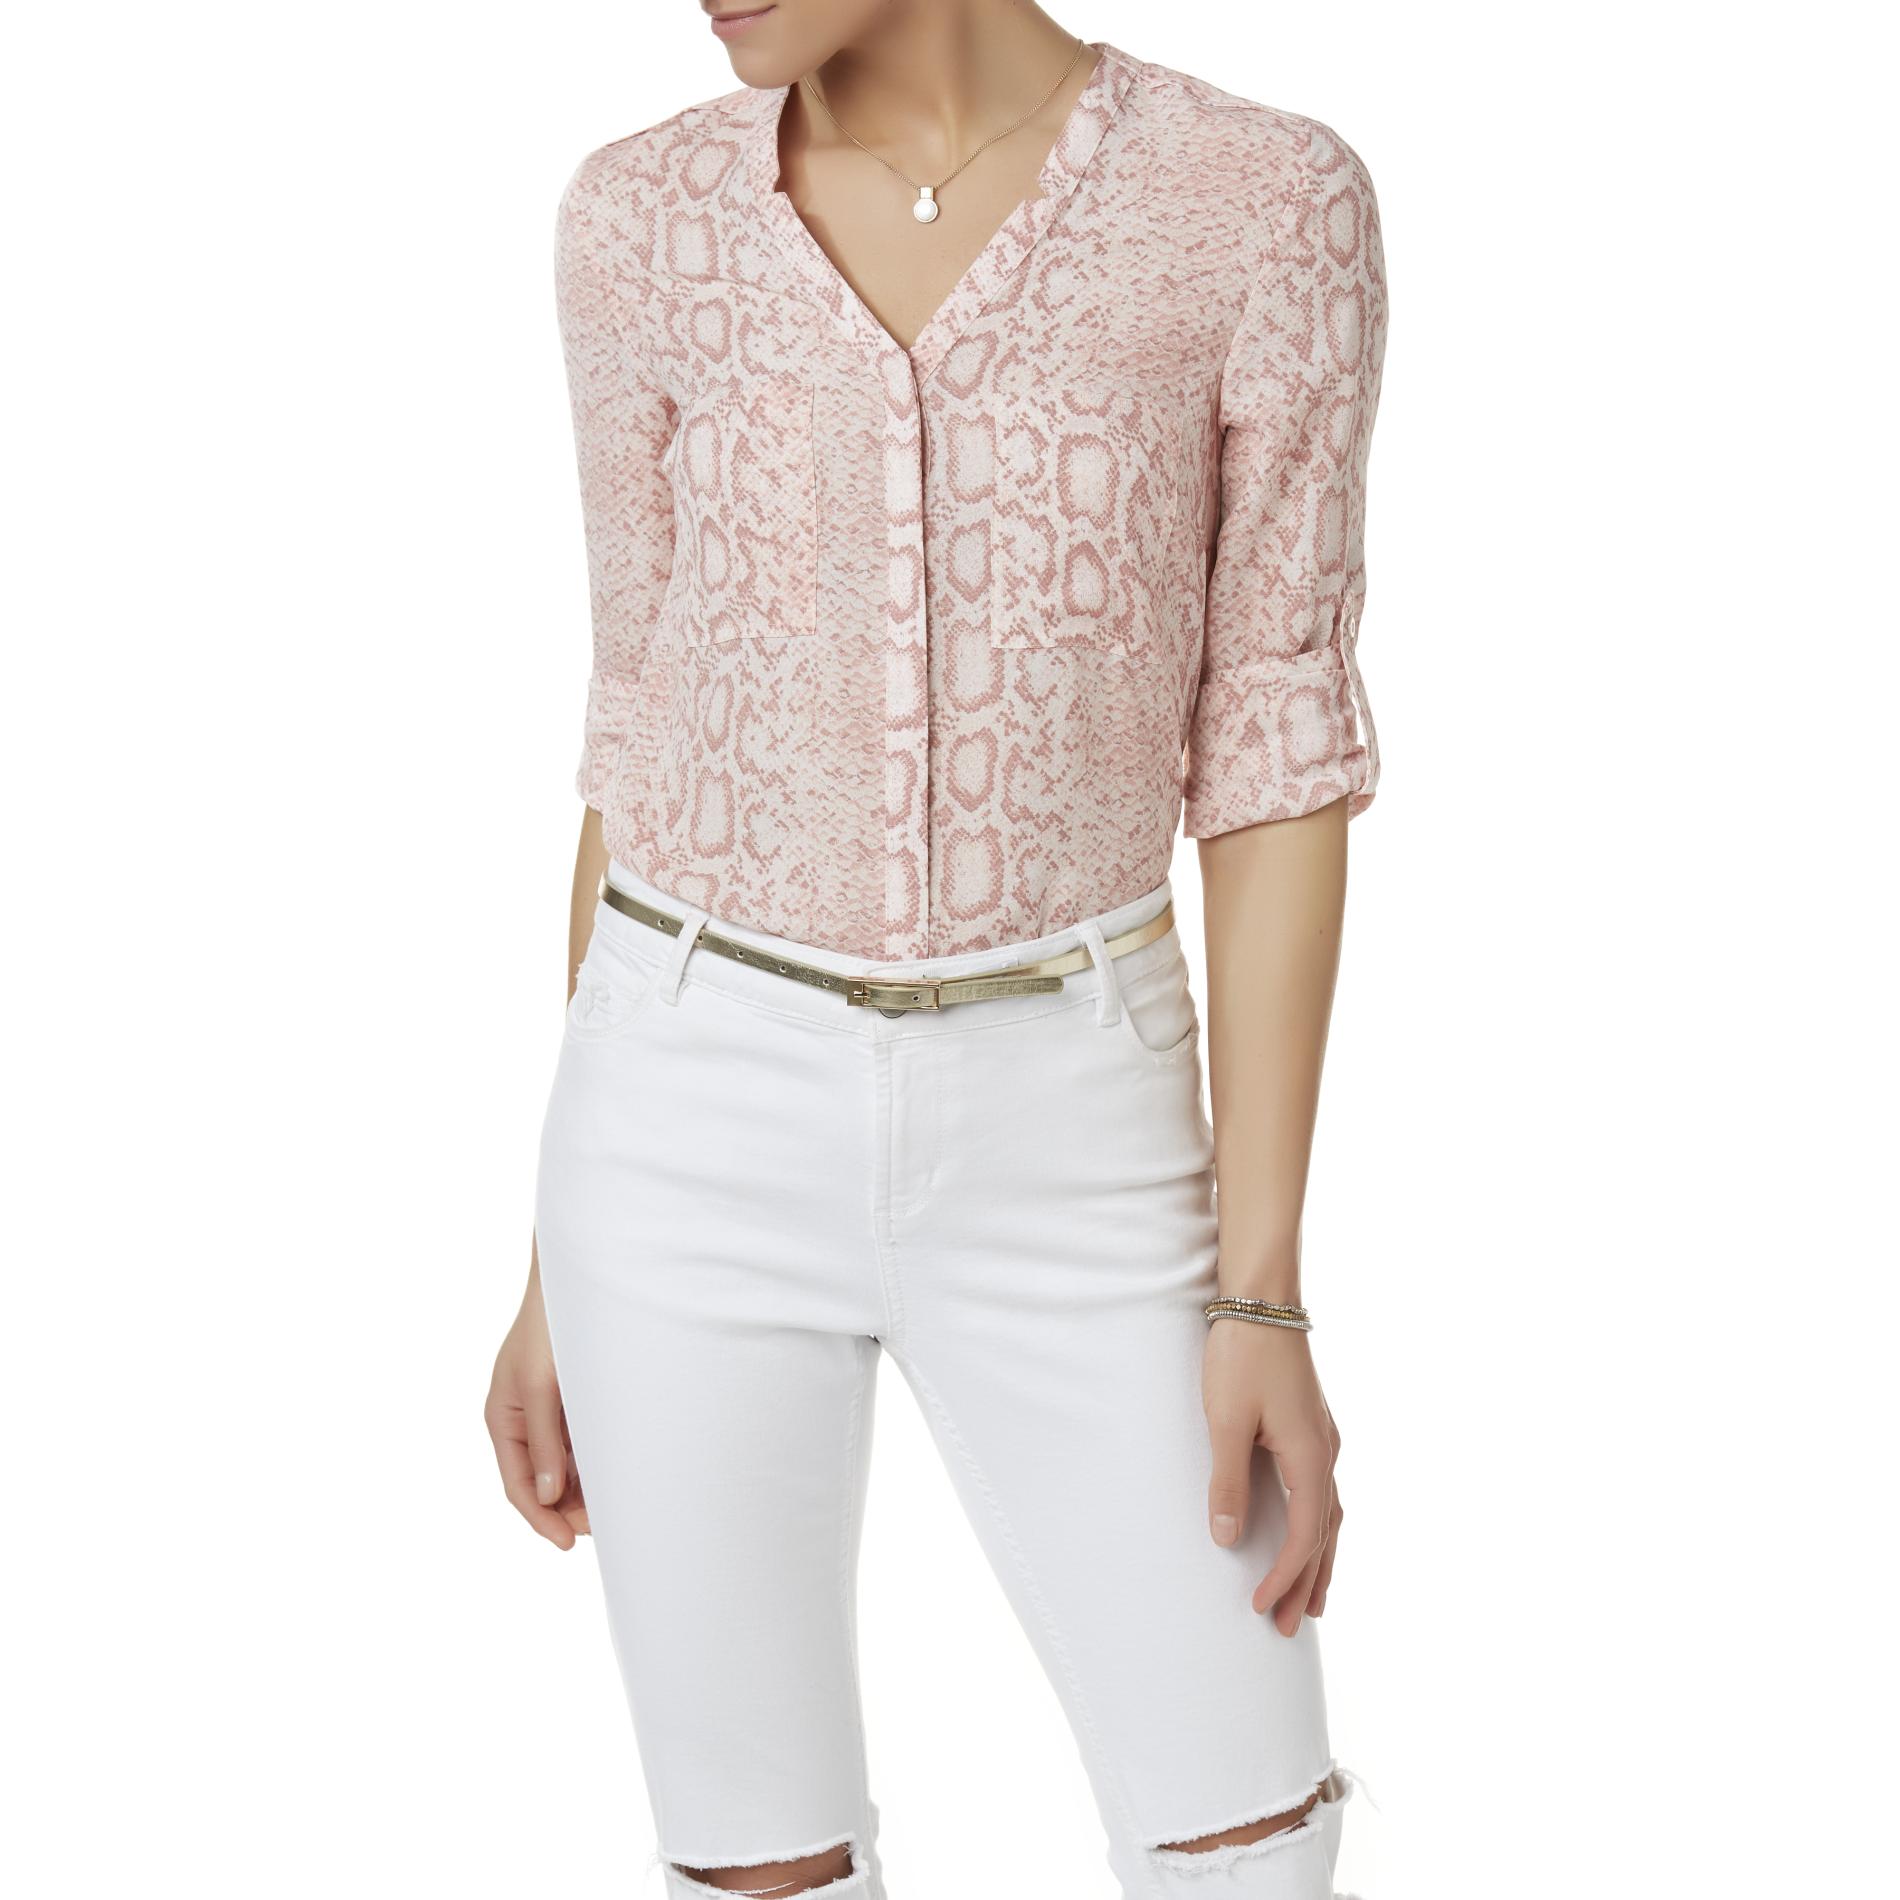 Simply Styled Women's Utility Blouse - Snakeskin